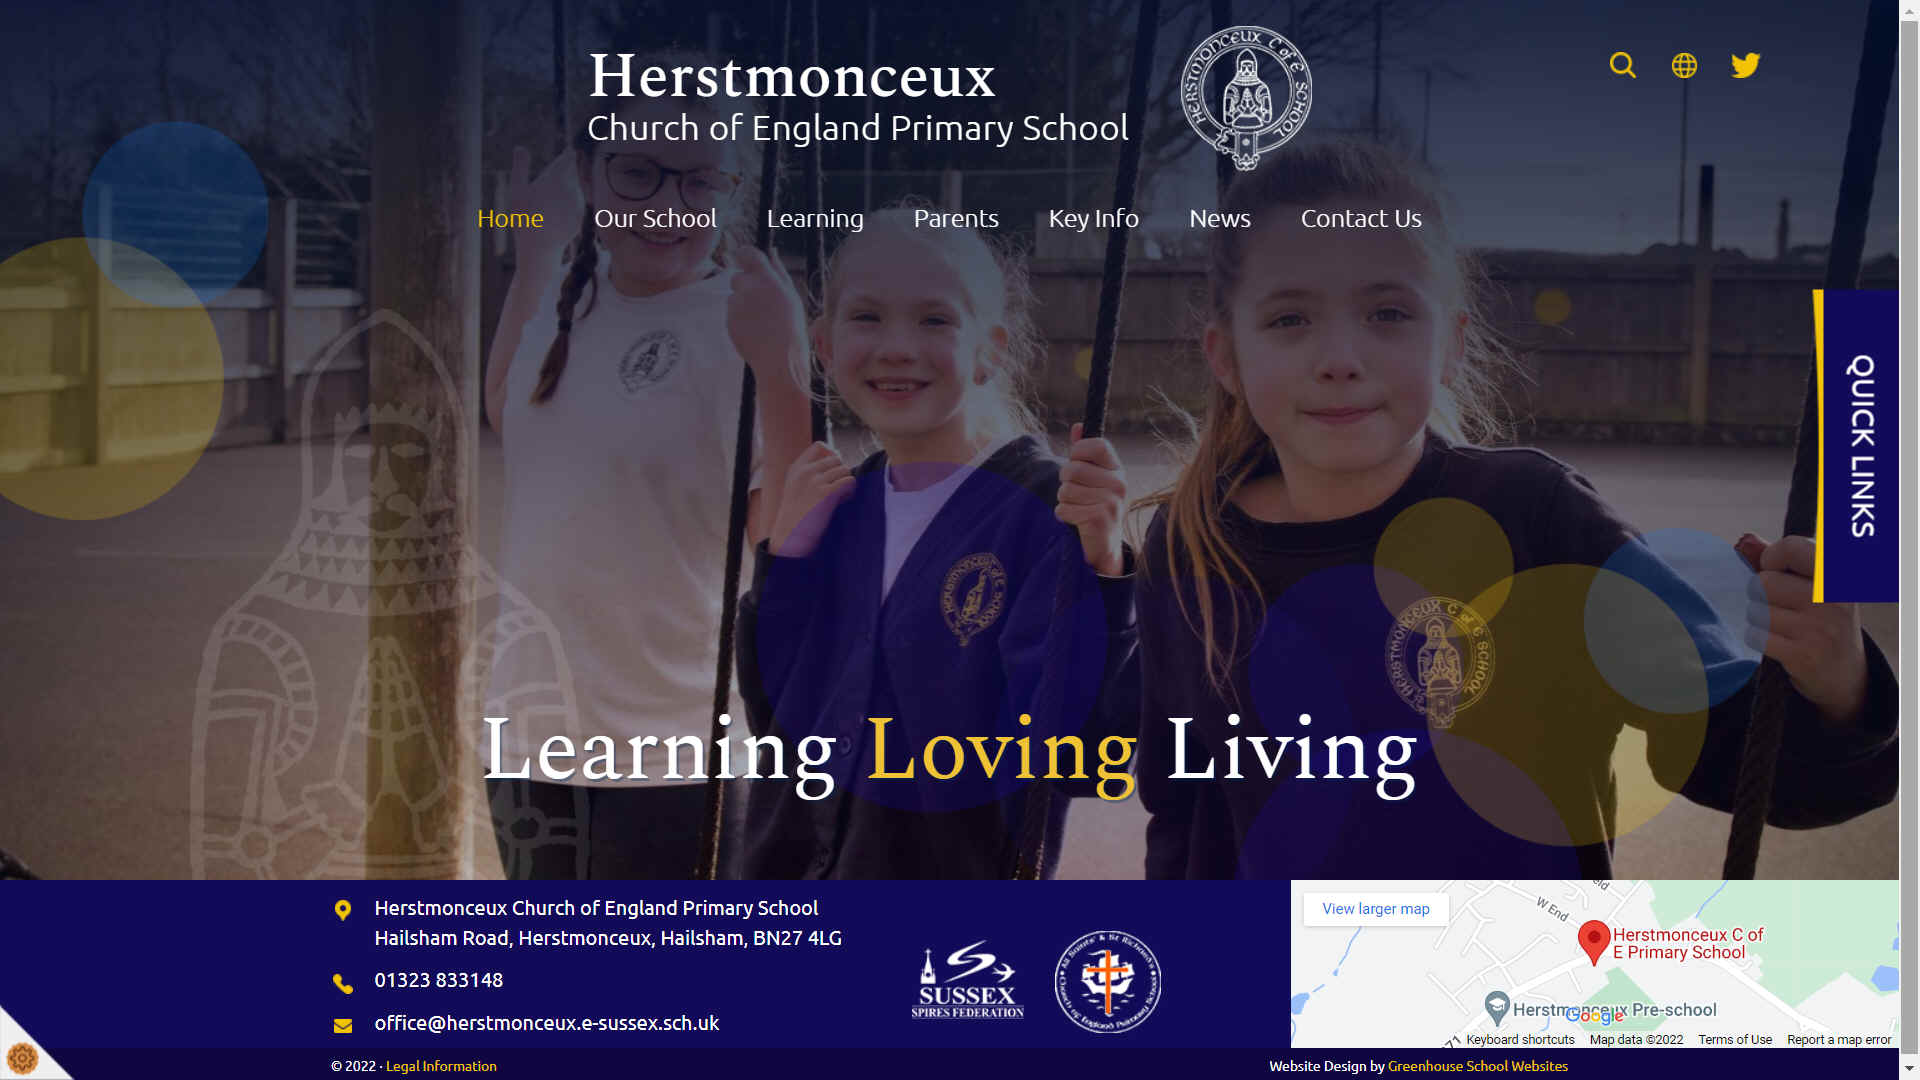 Herstmonceux Church of England Primary School